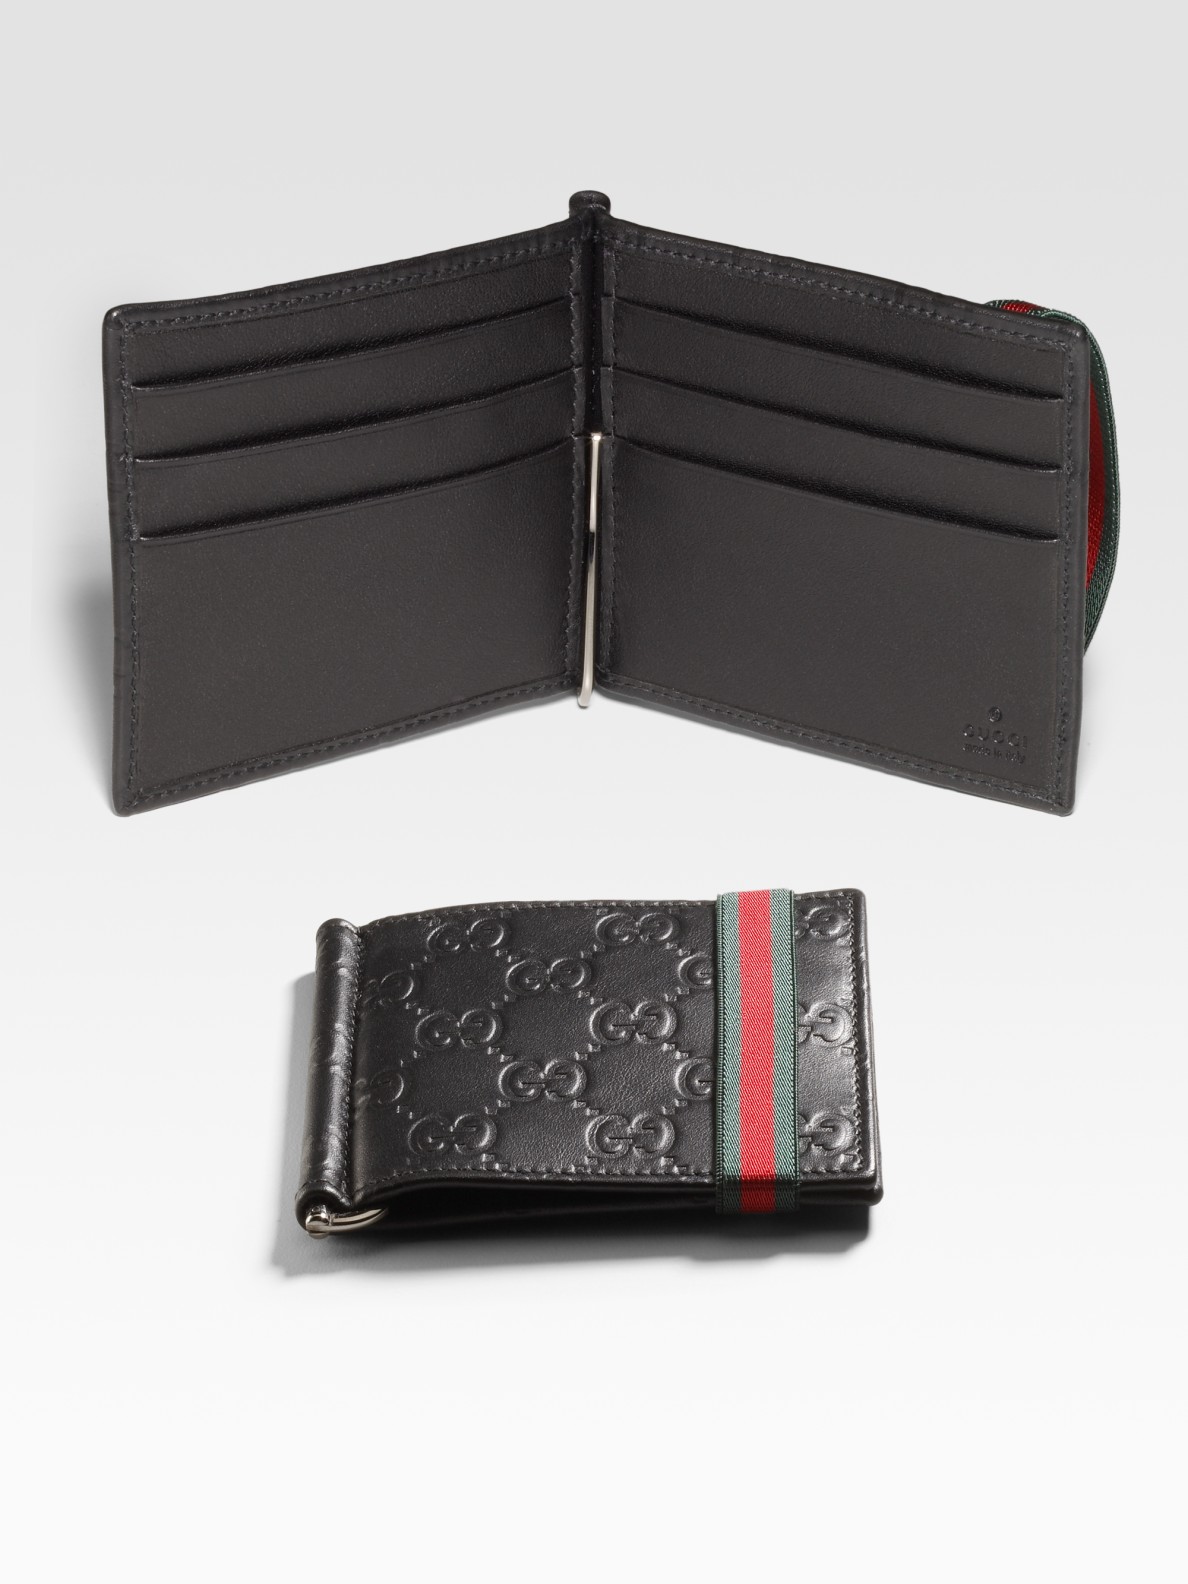 North Roasted Train محفظة Gucci Signature Money Clip Wallet extremely  Authentication enter